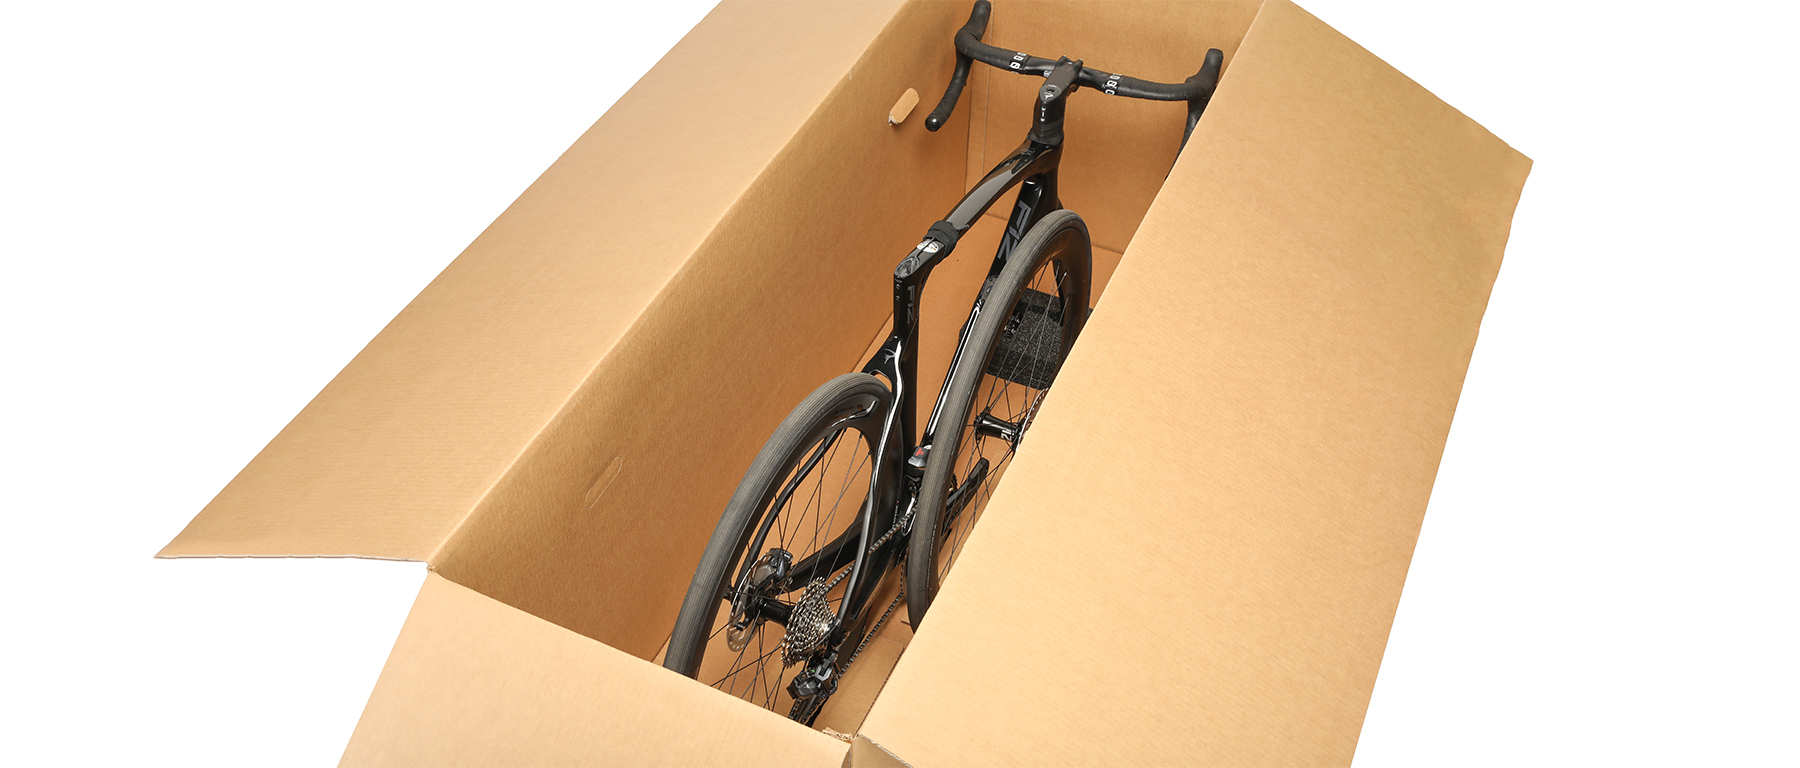 Excel Sports Ready 2 Ride Bicycle Shipment